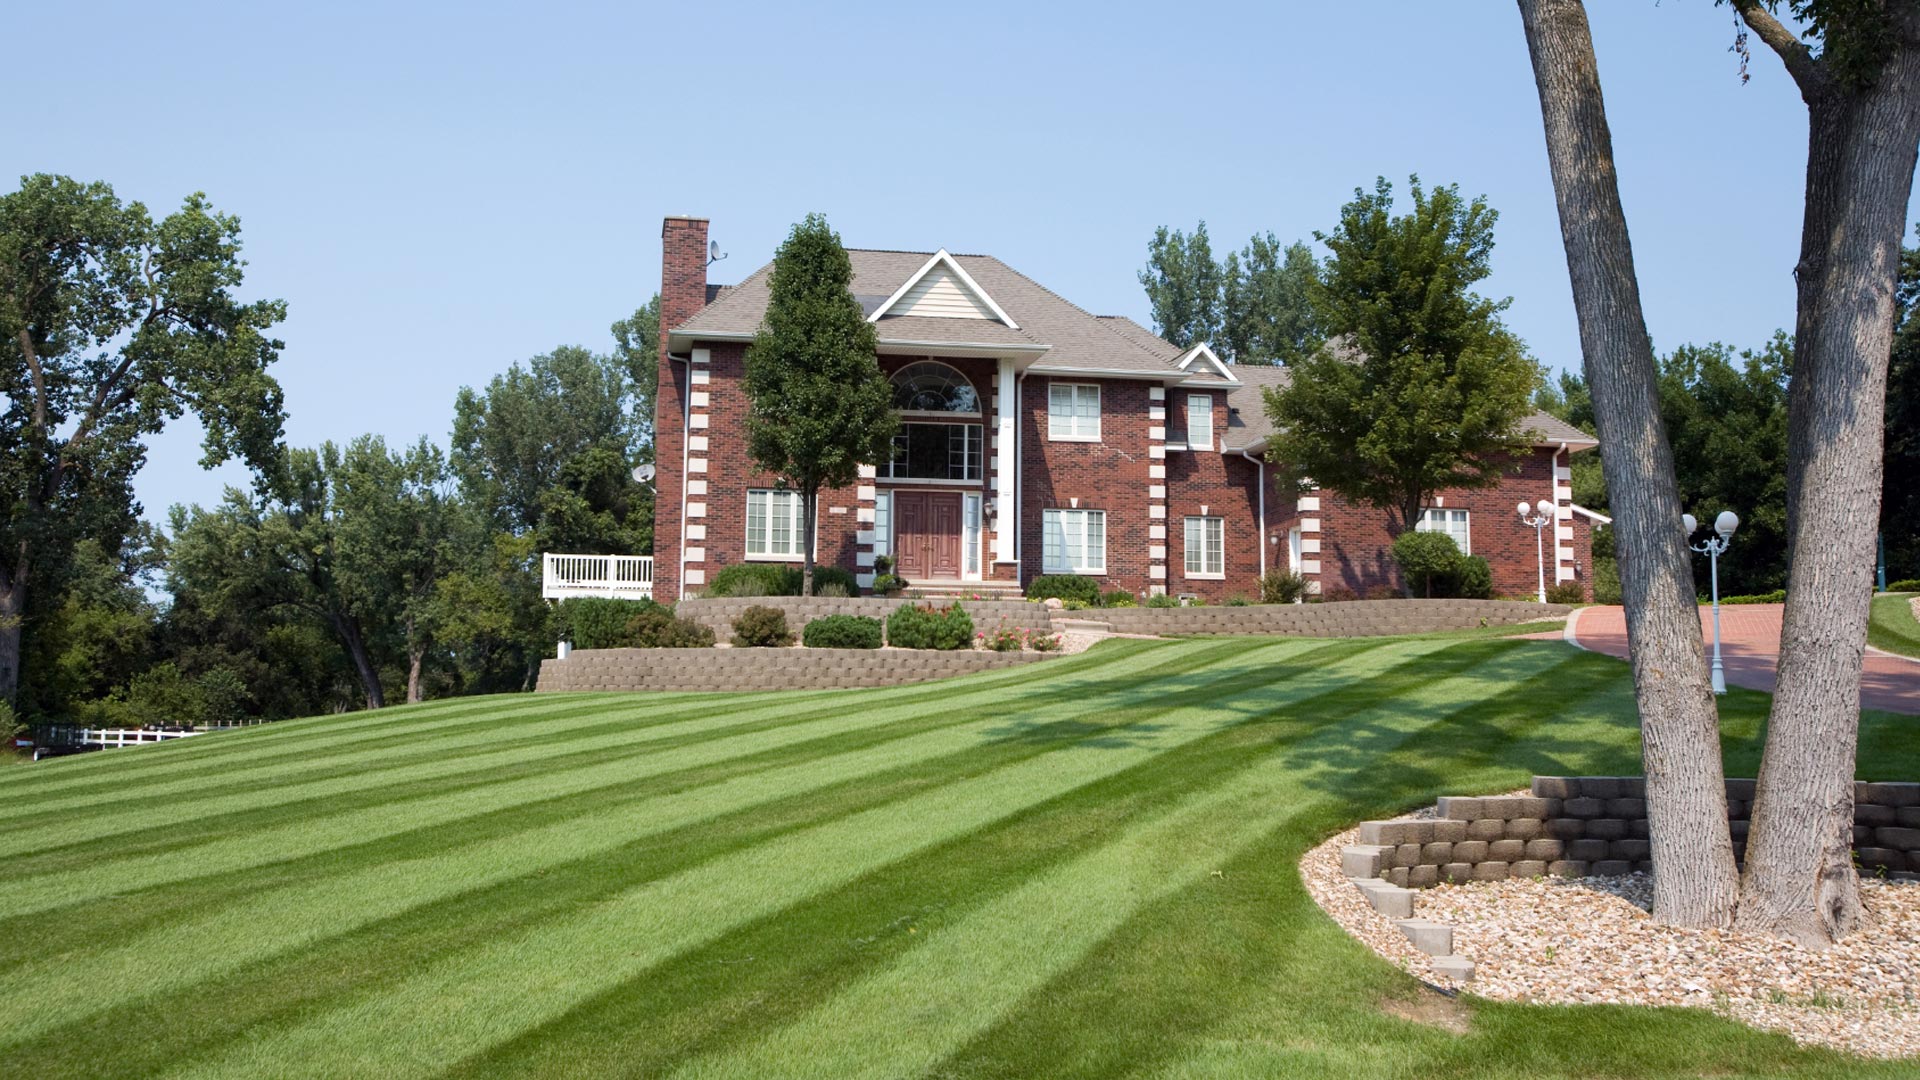 Lawn mowed with stripes and new landscaping installation at a home in Medina, OH.